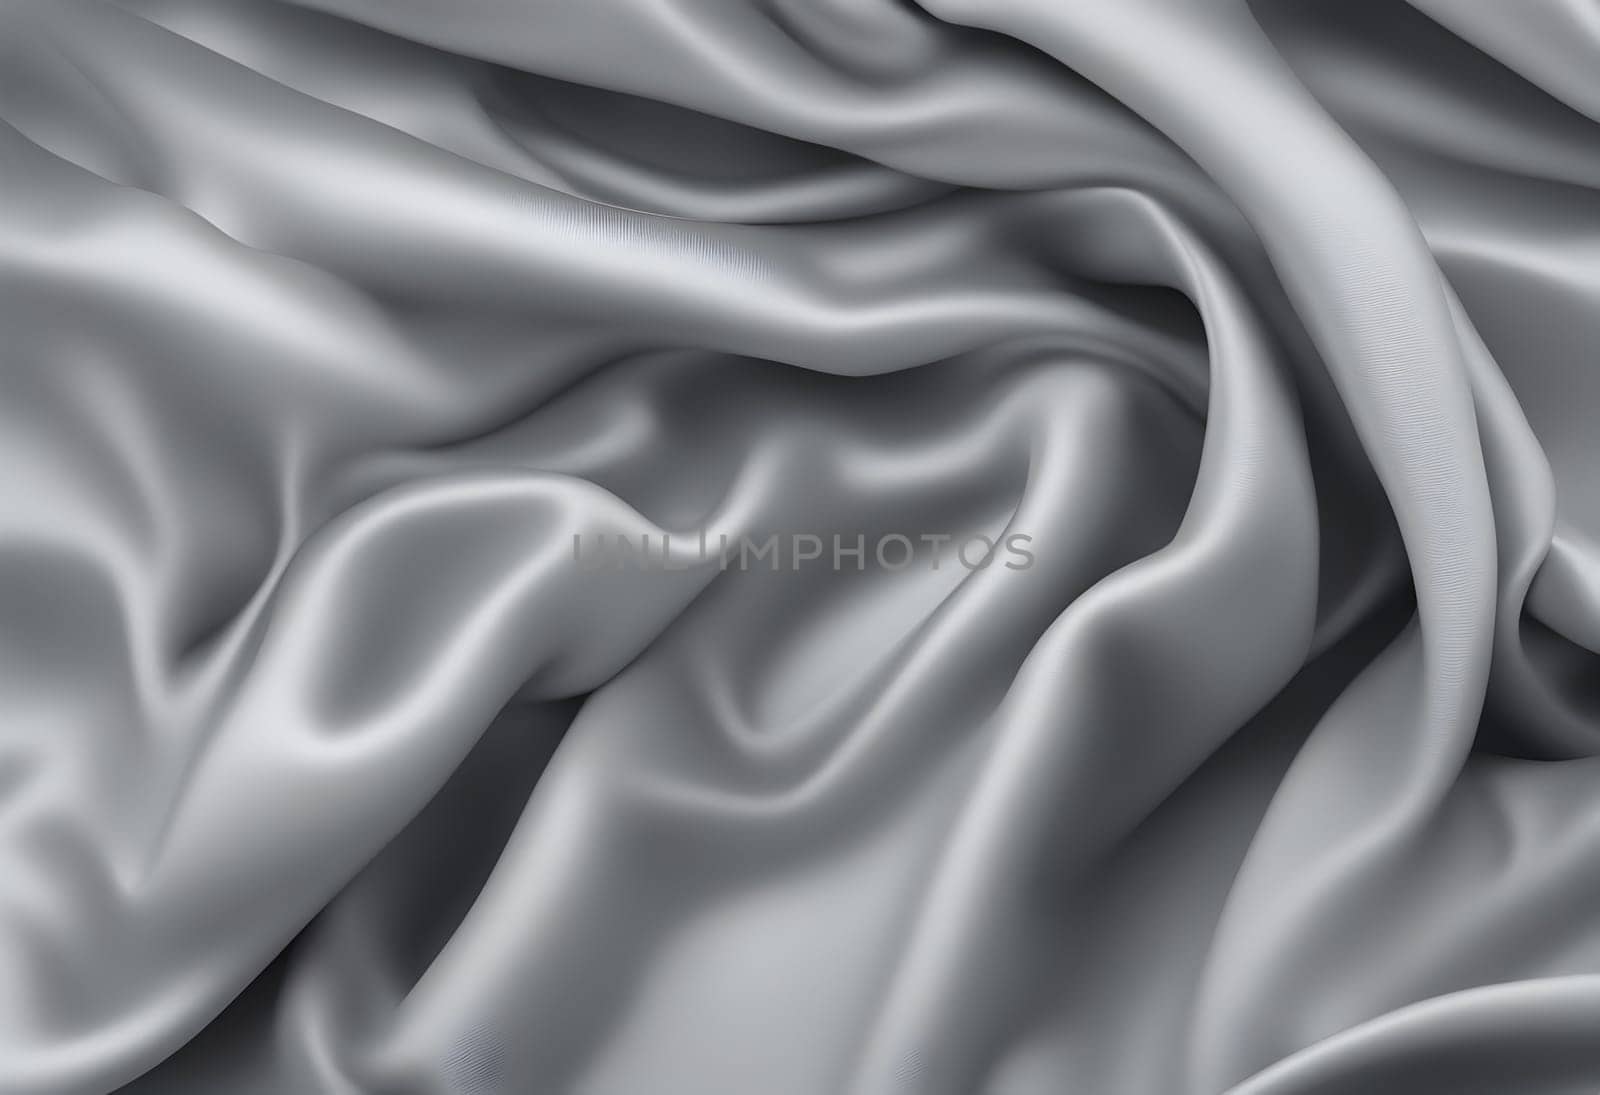 Technology background realistic color background folds of fabric or overlay for product or in shades of metallic light grey color by rostik924